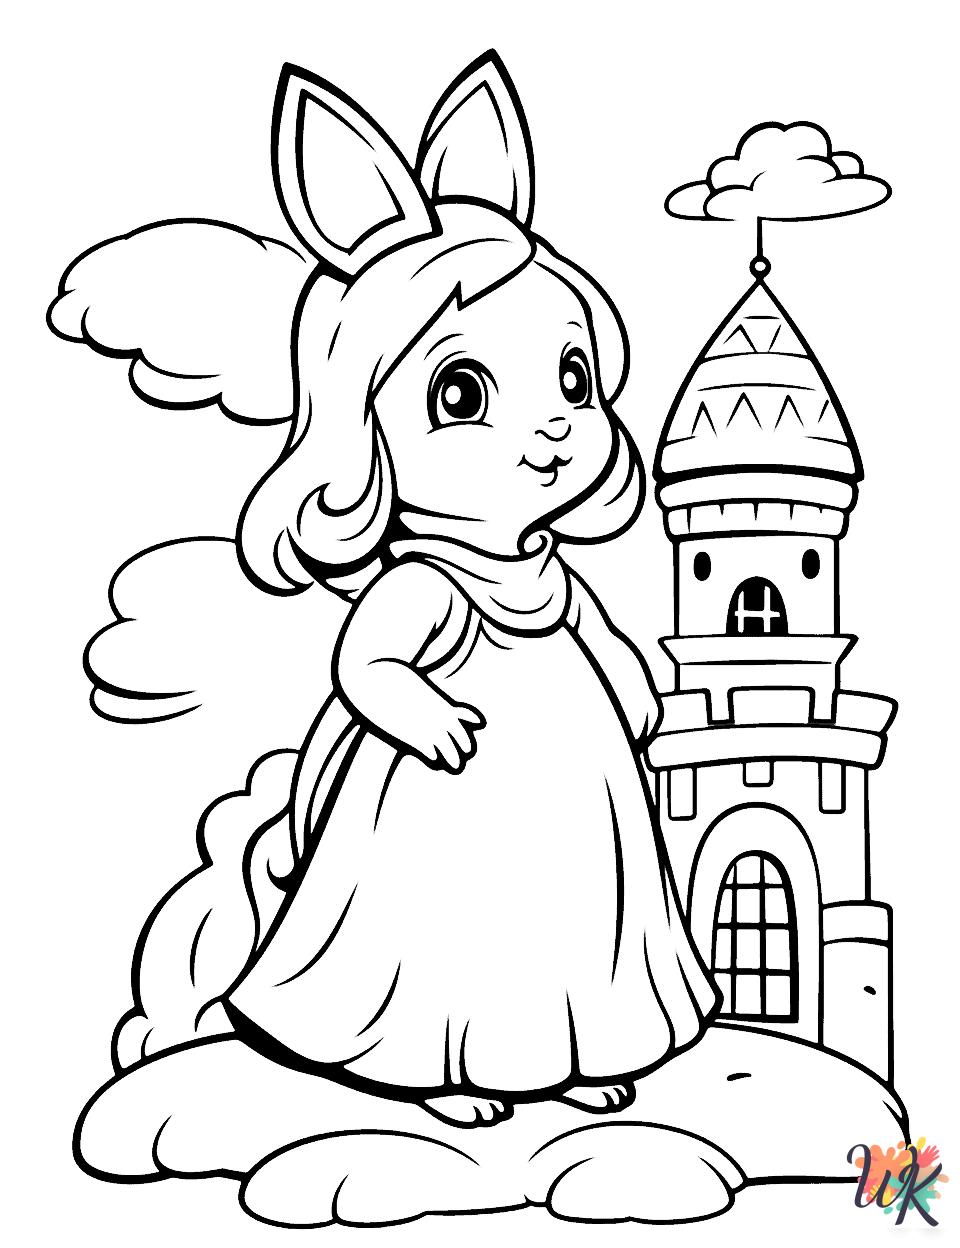 Rabbits coloring pages printable